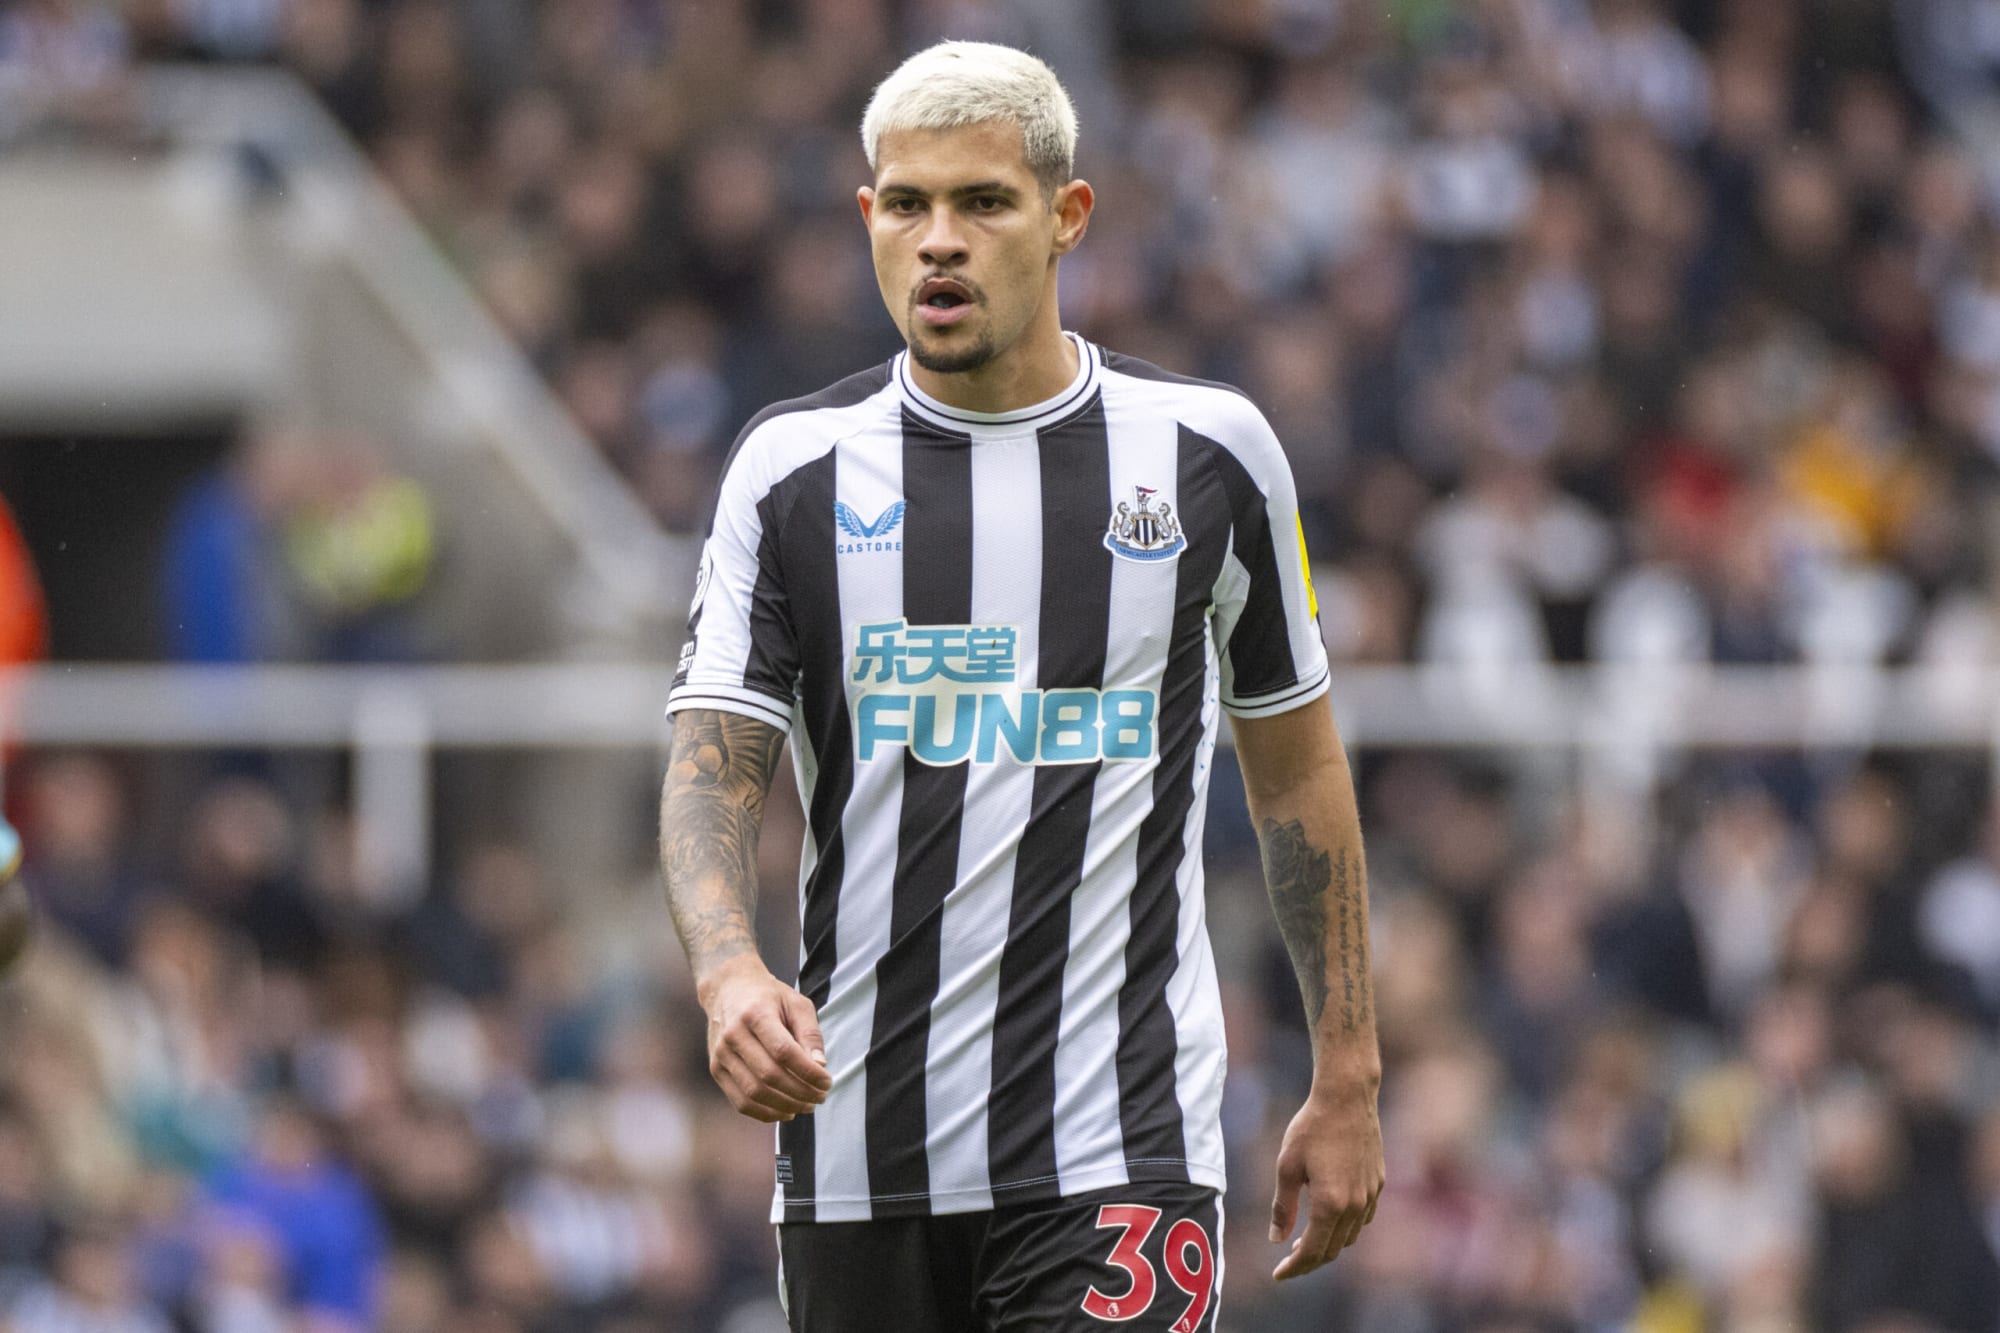 Newcastle’s Bruno Guimaraes needs to be put in a position to succeed